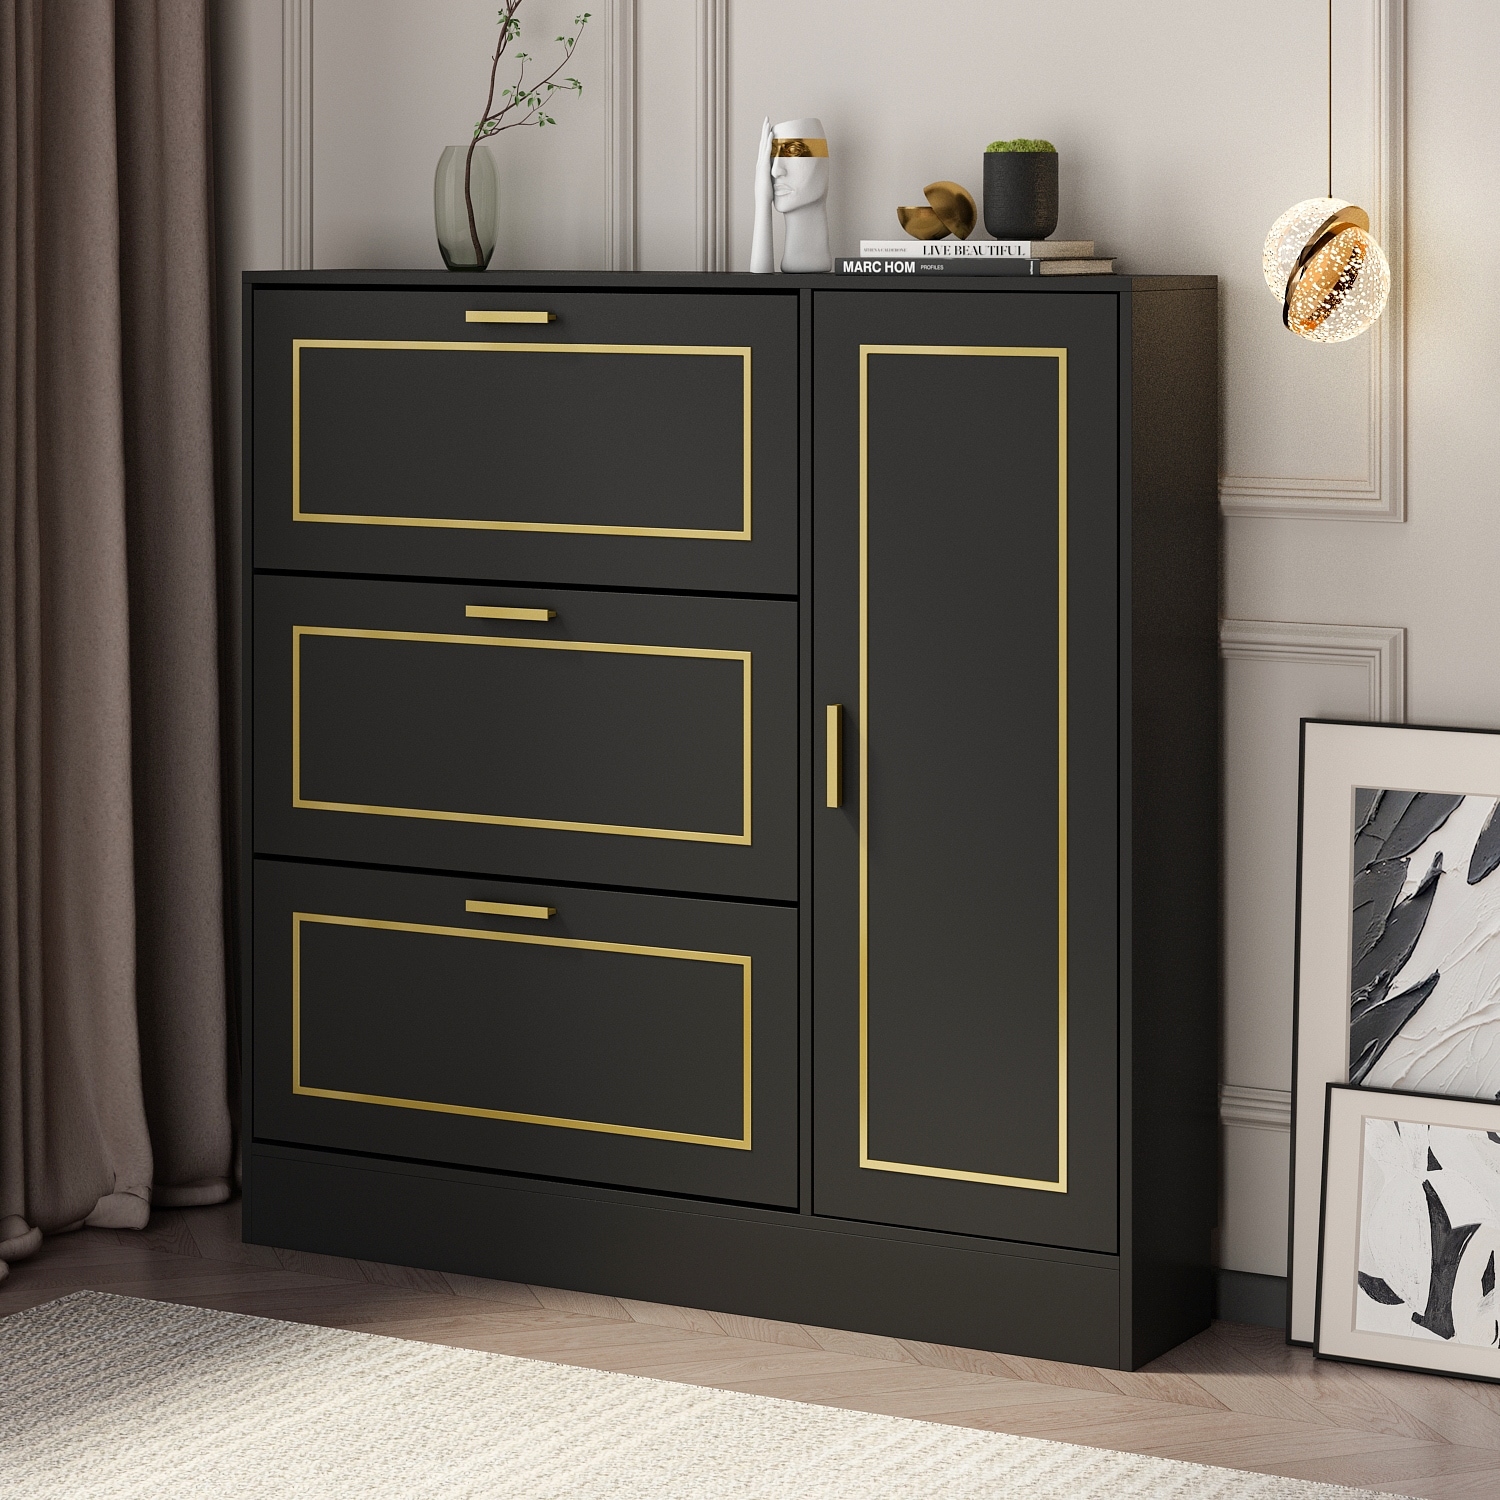 3 Drawer Shoe Storage Cabinet with 1 Door Everly Quinn Finish: Black